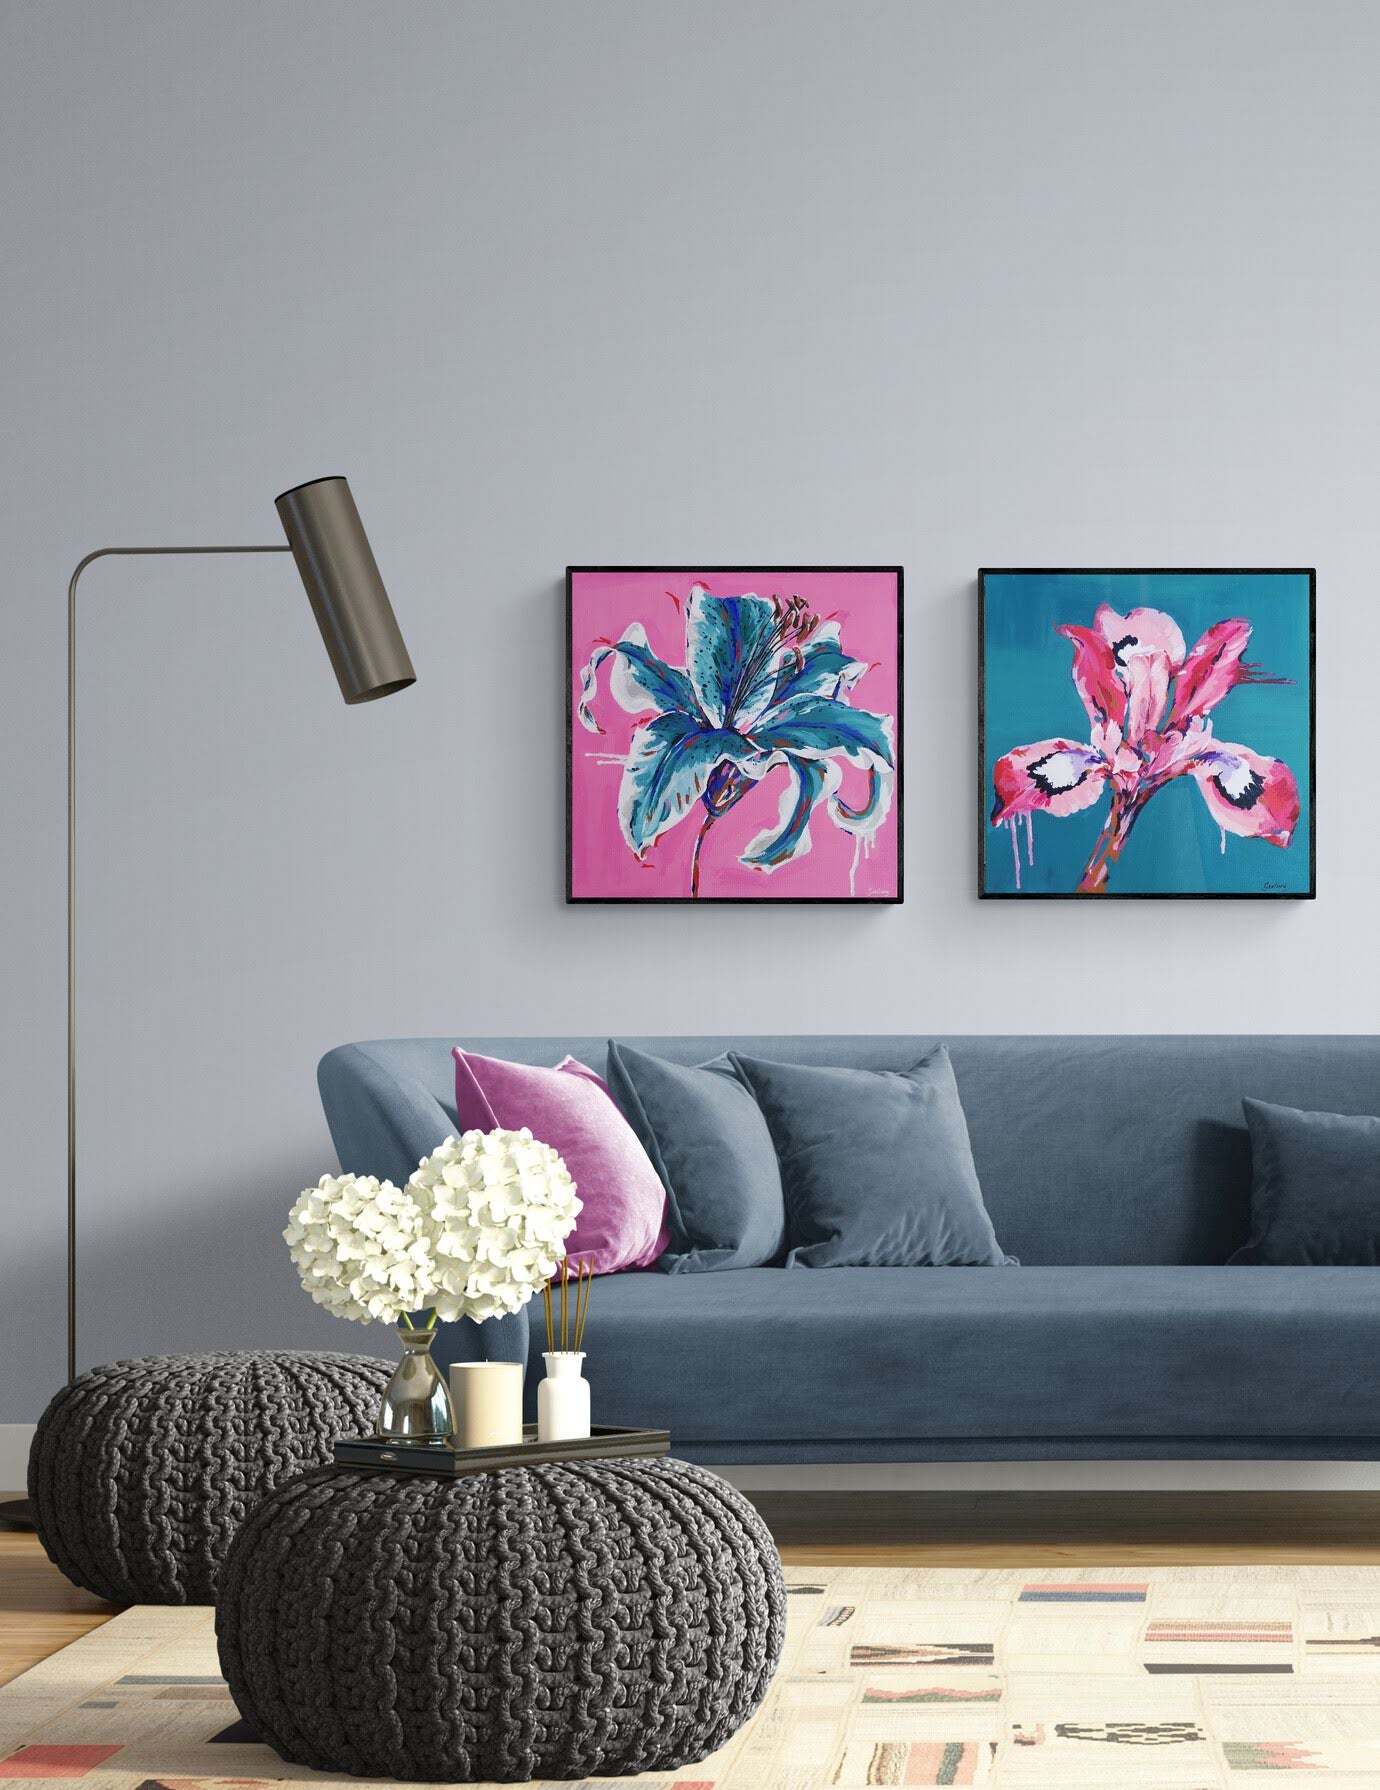 Pair of colourful abstract floral paintings by Judy Century hanging in contemporary living room above navy couch